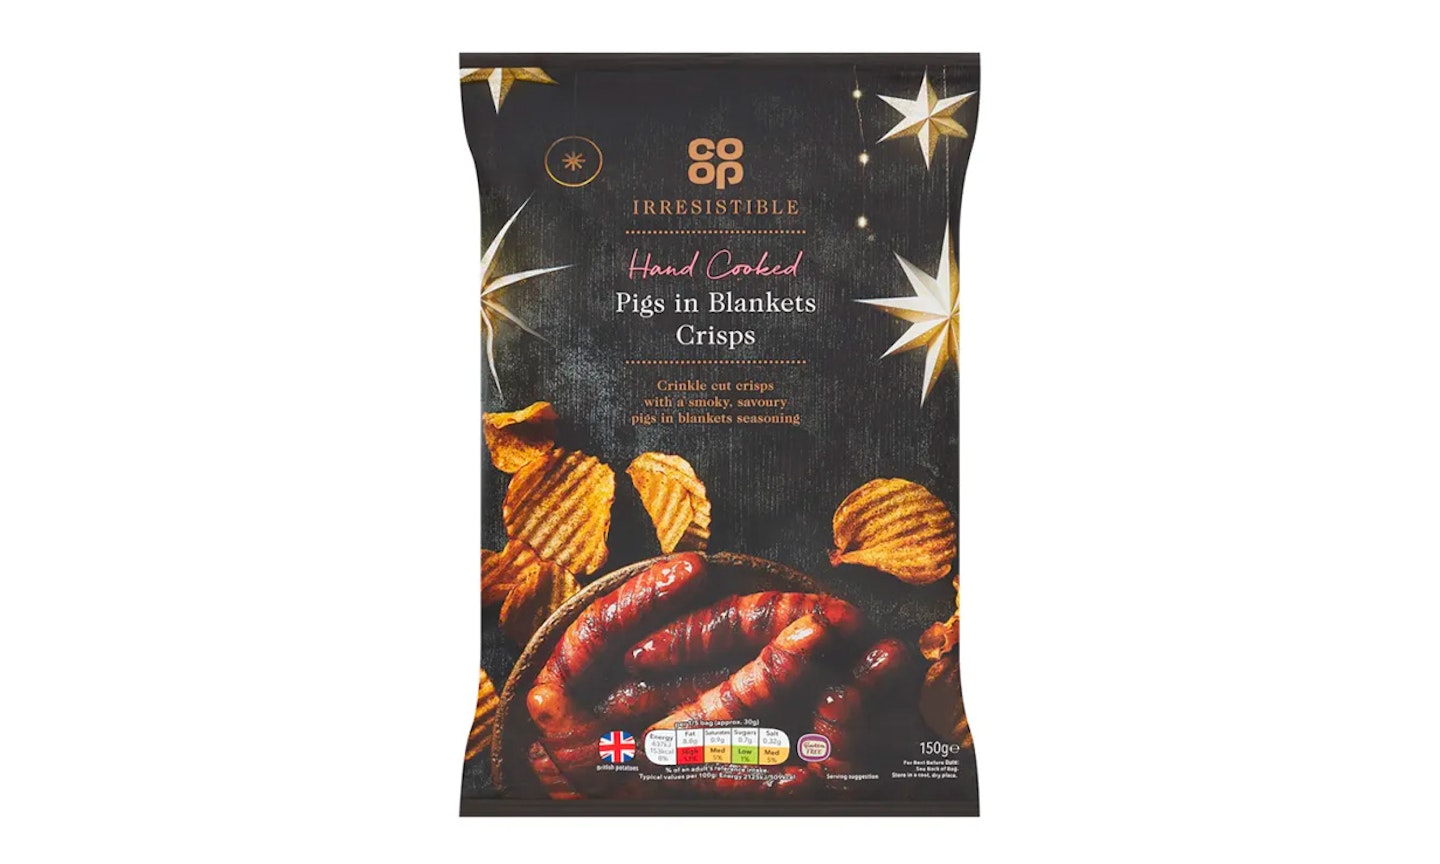 Co-op, Irresistible Pigs in Blankets Hand Cooked Crisps, £1.35